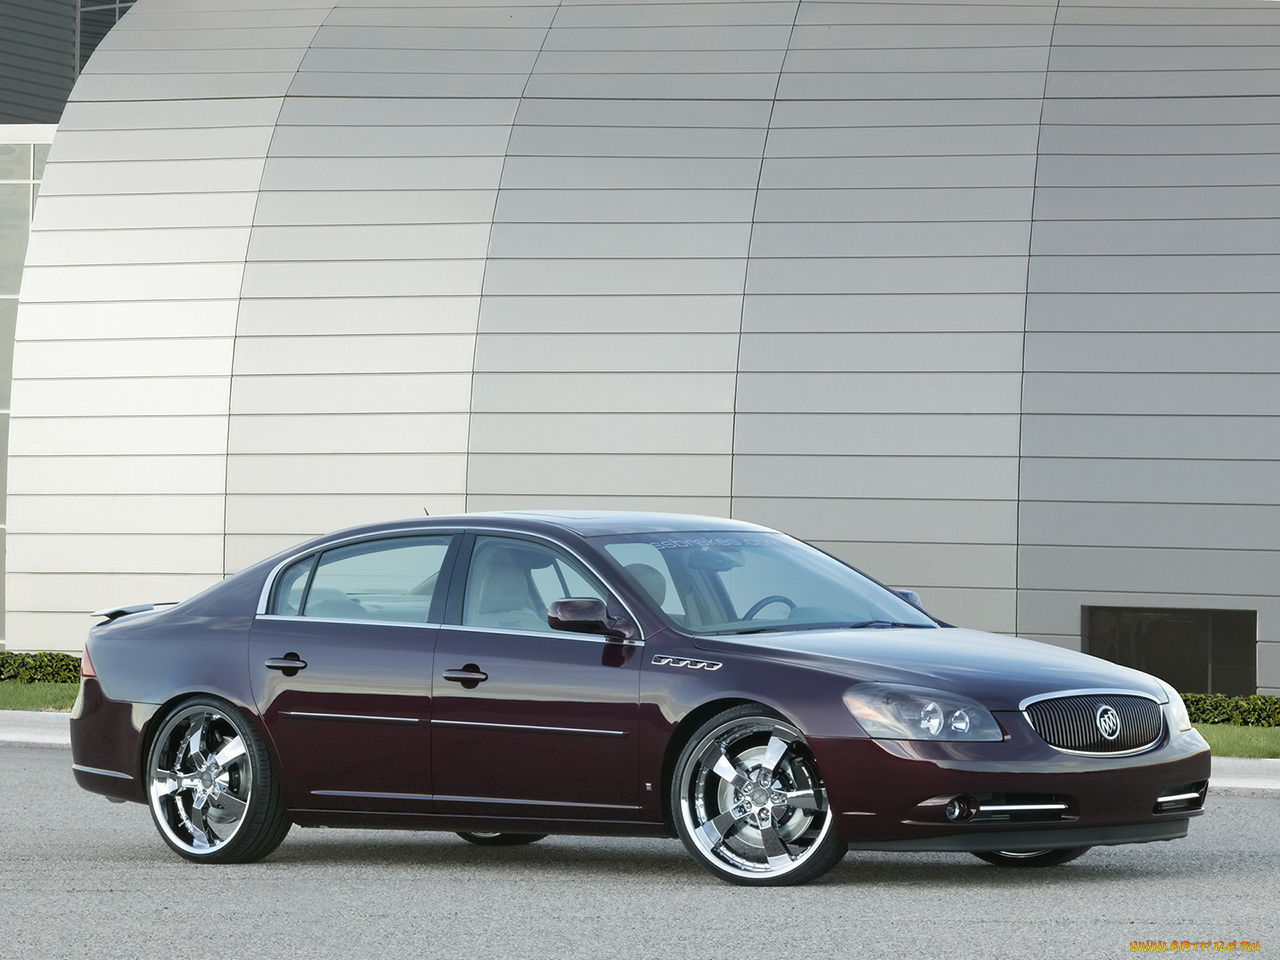 2006, buick, lucerne, cst, by, stainless, steel, brakes, corp, автомобили